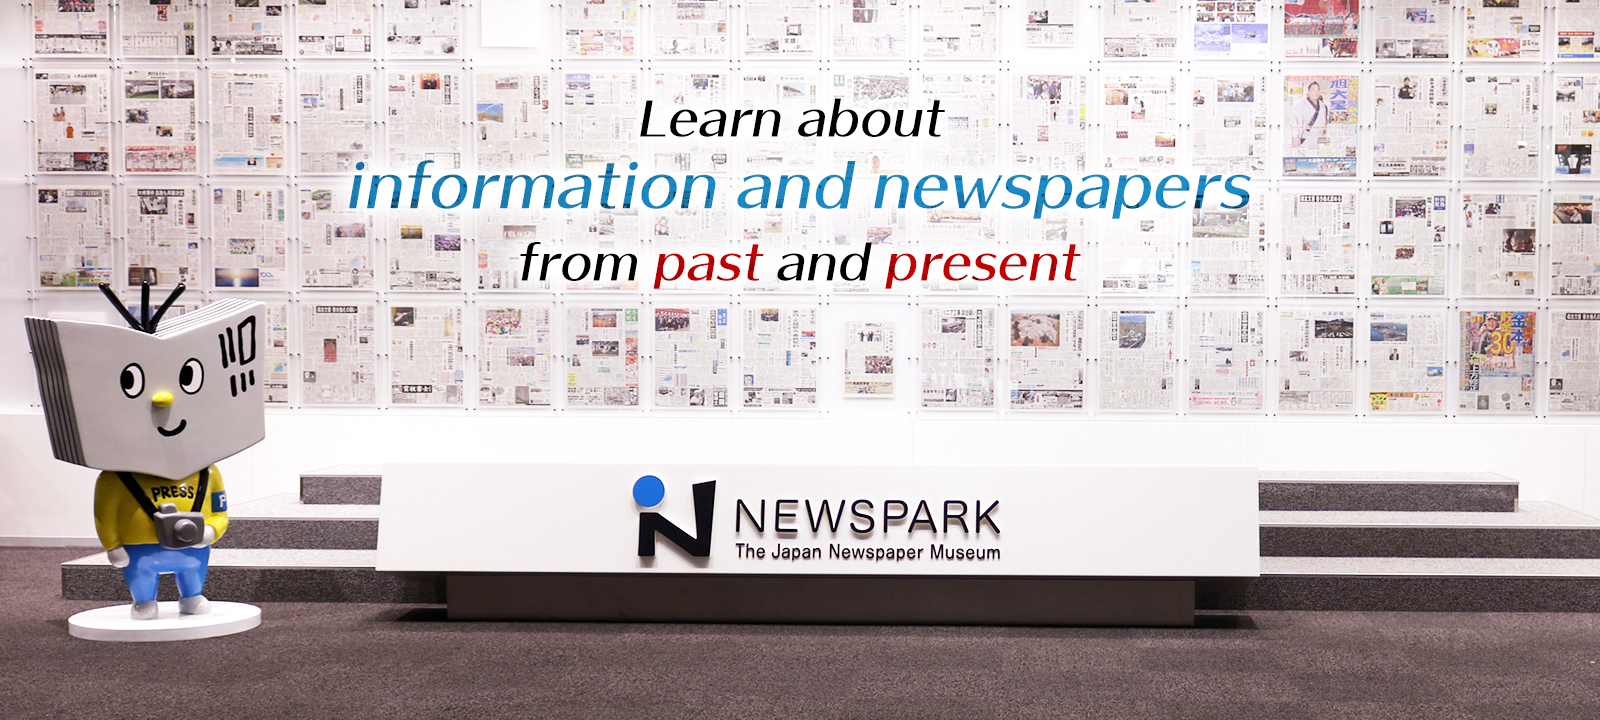 Learn about the information and newspapers from past and present